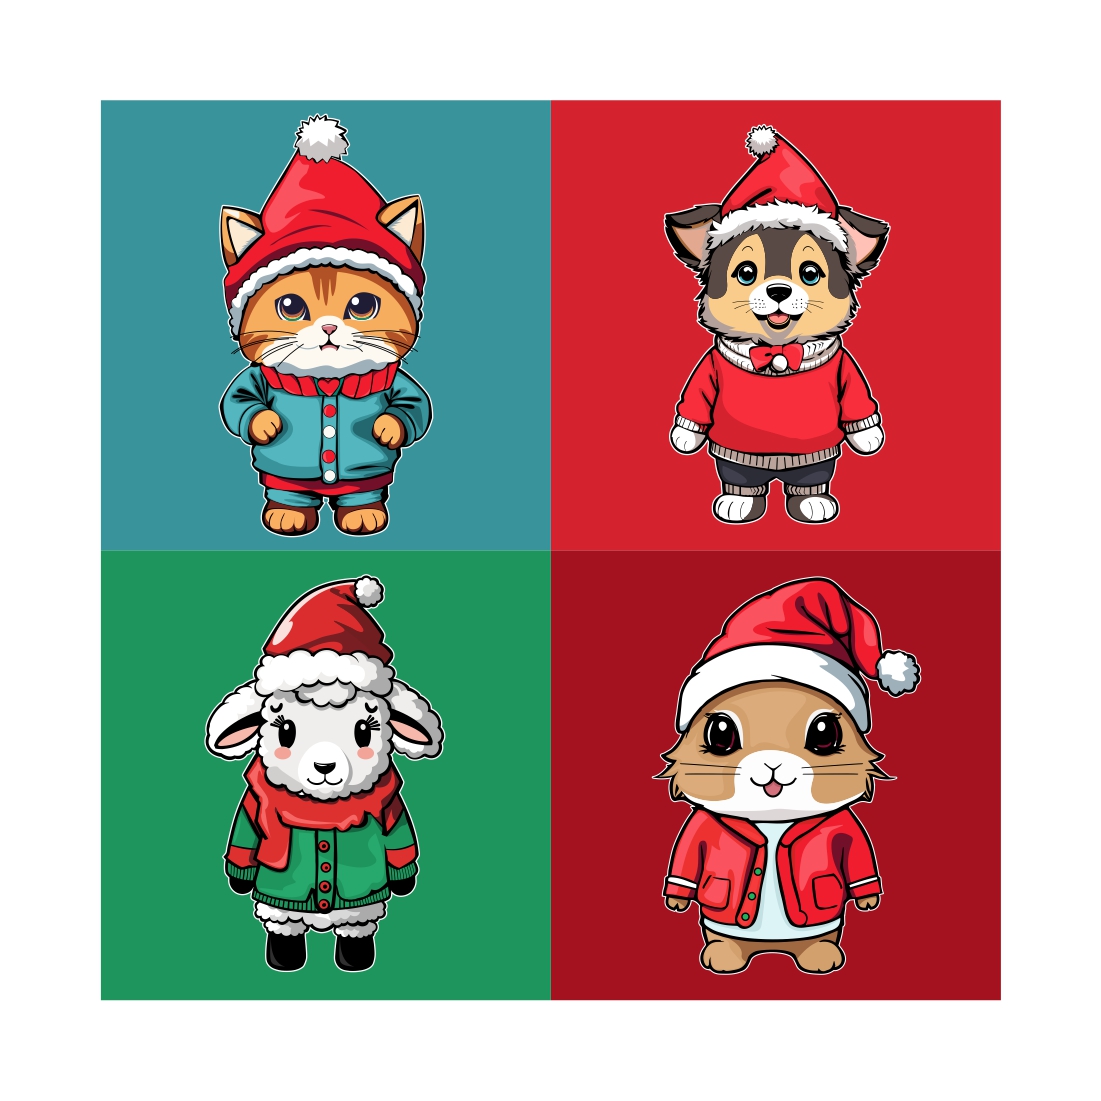 4 cute animal characters with a Christmas theme - only $5 preview image.